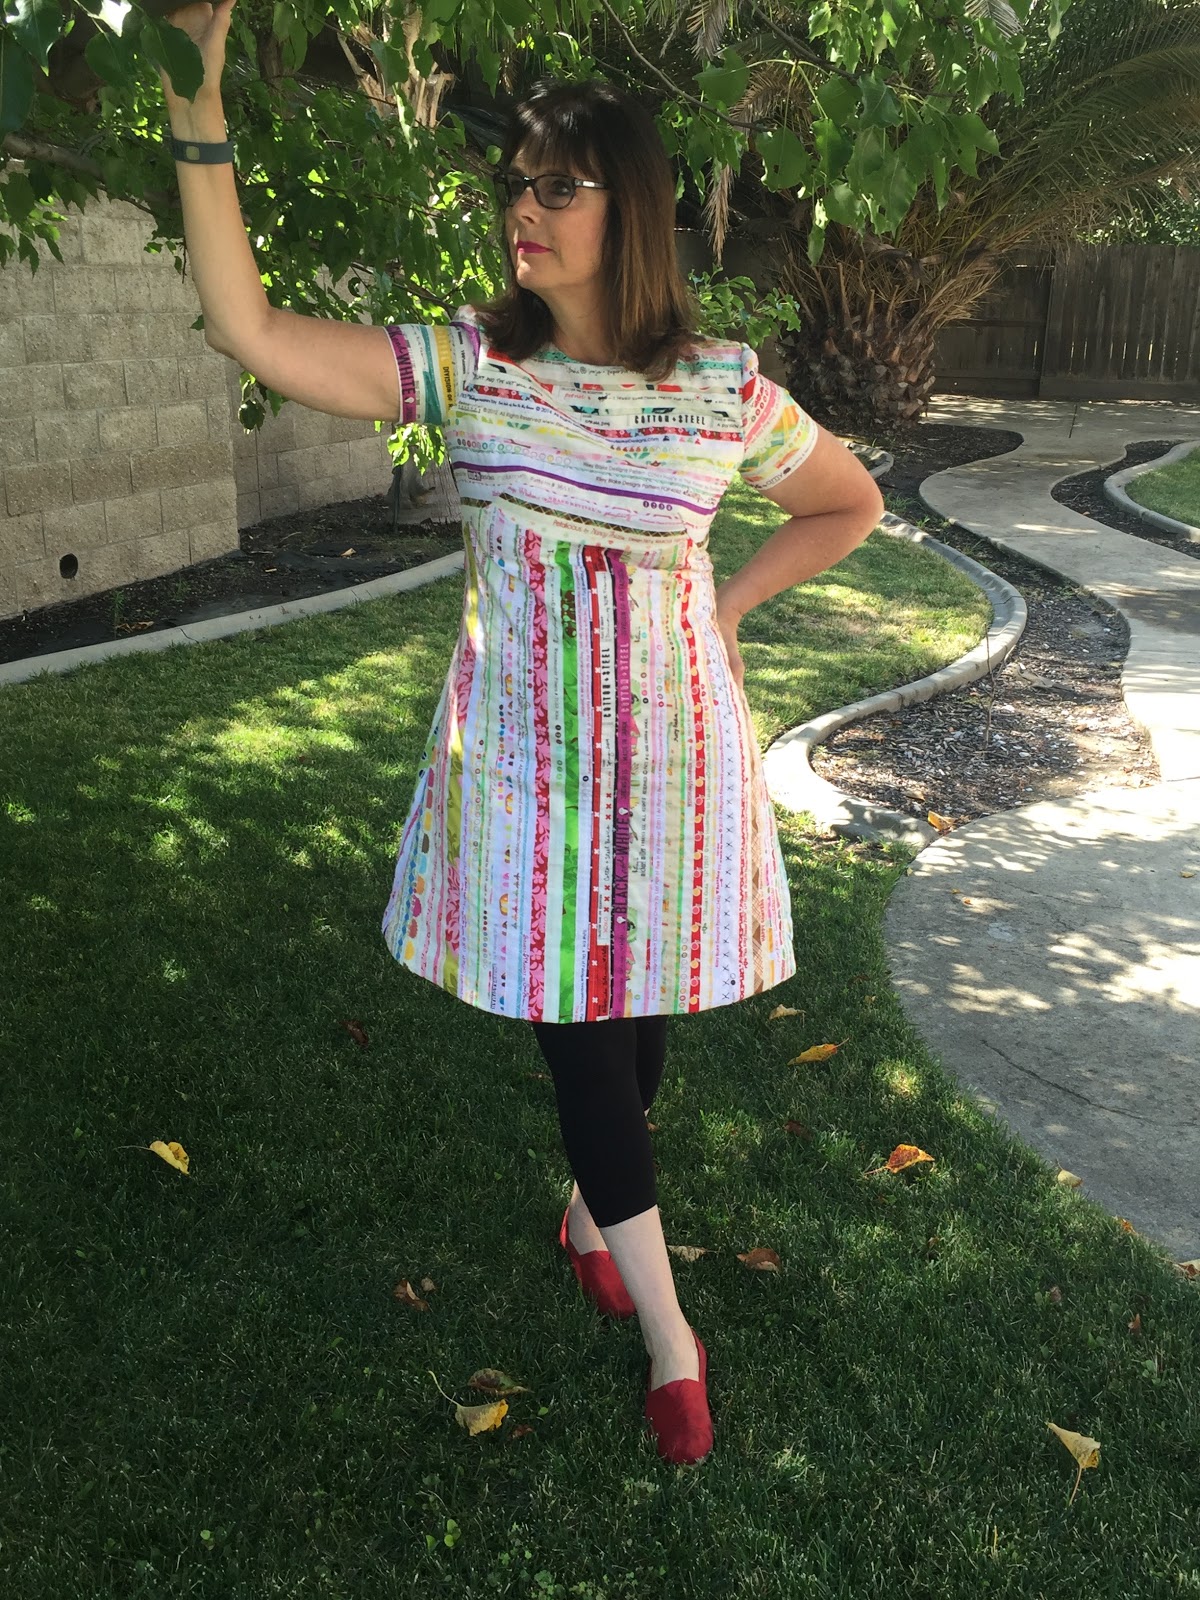 dream quilt create: My selvage dress!